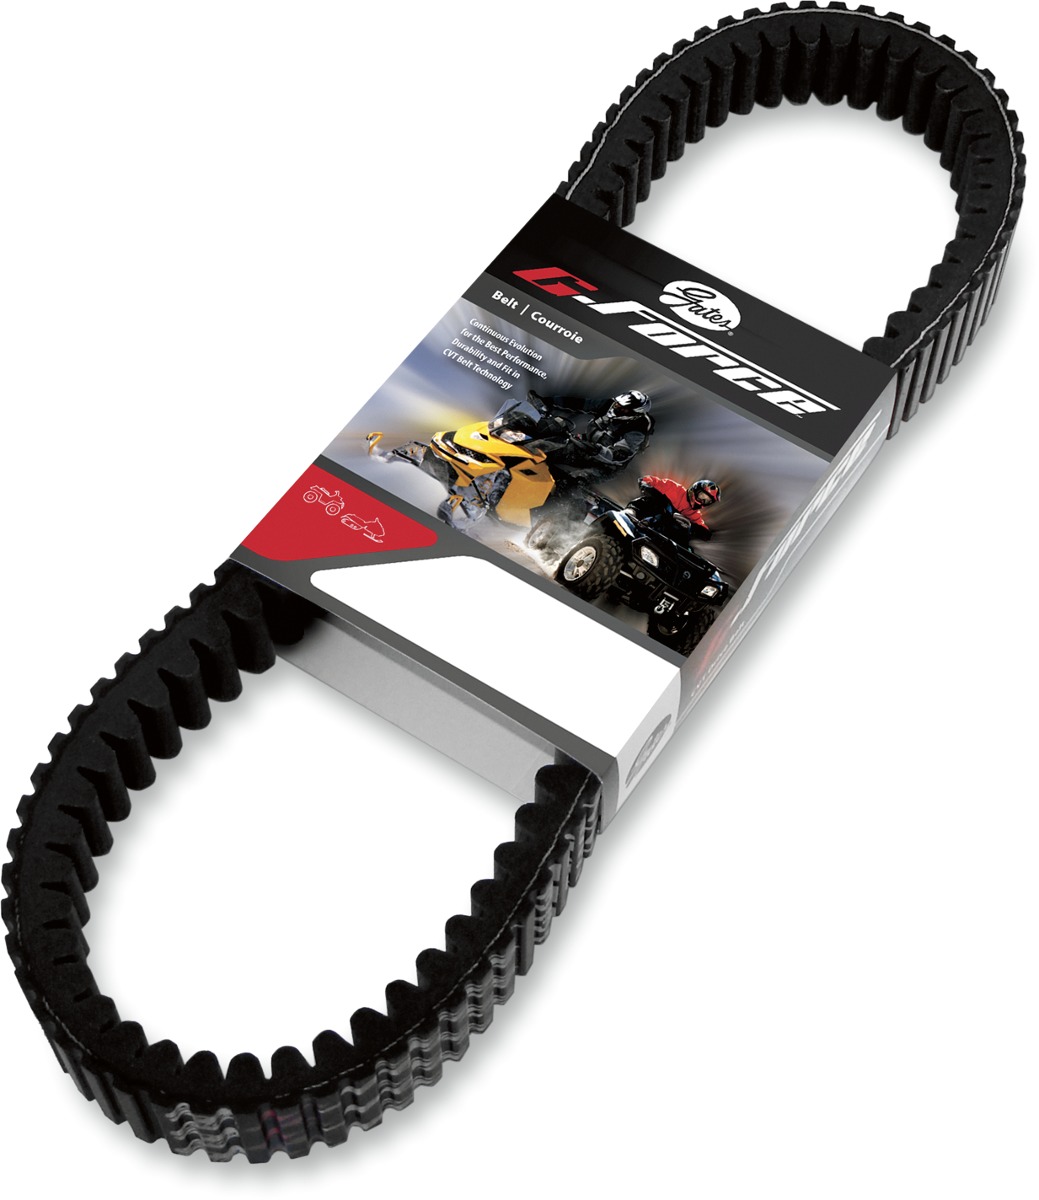 G-Force Flat-Top Drive Belt 1-9/32" - For 14-19 Polaris 550 Indy - Click Image to Close